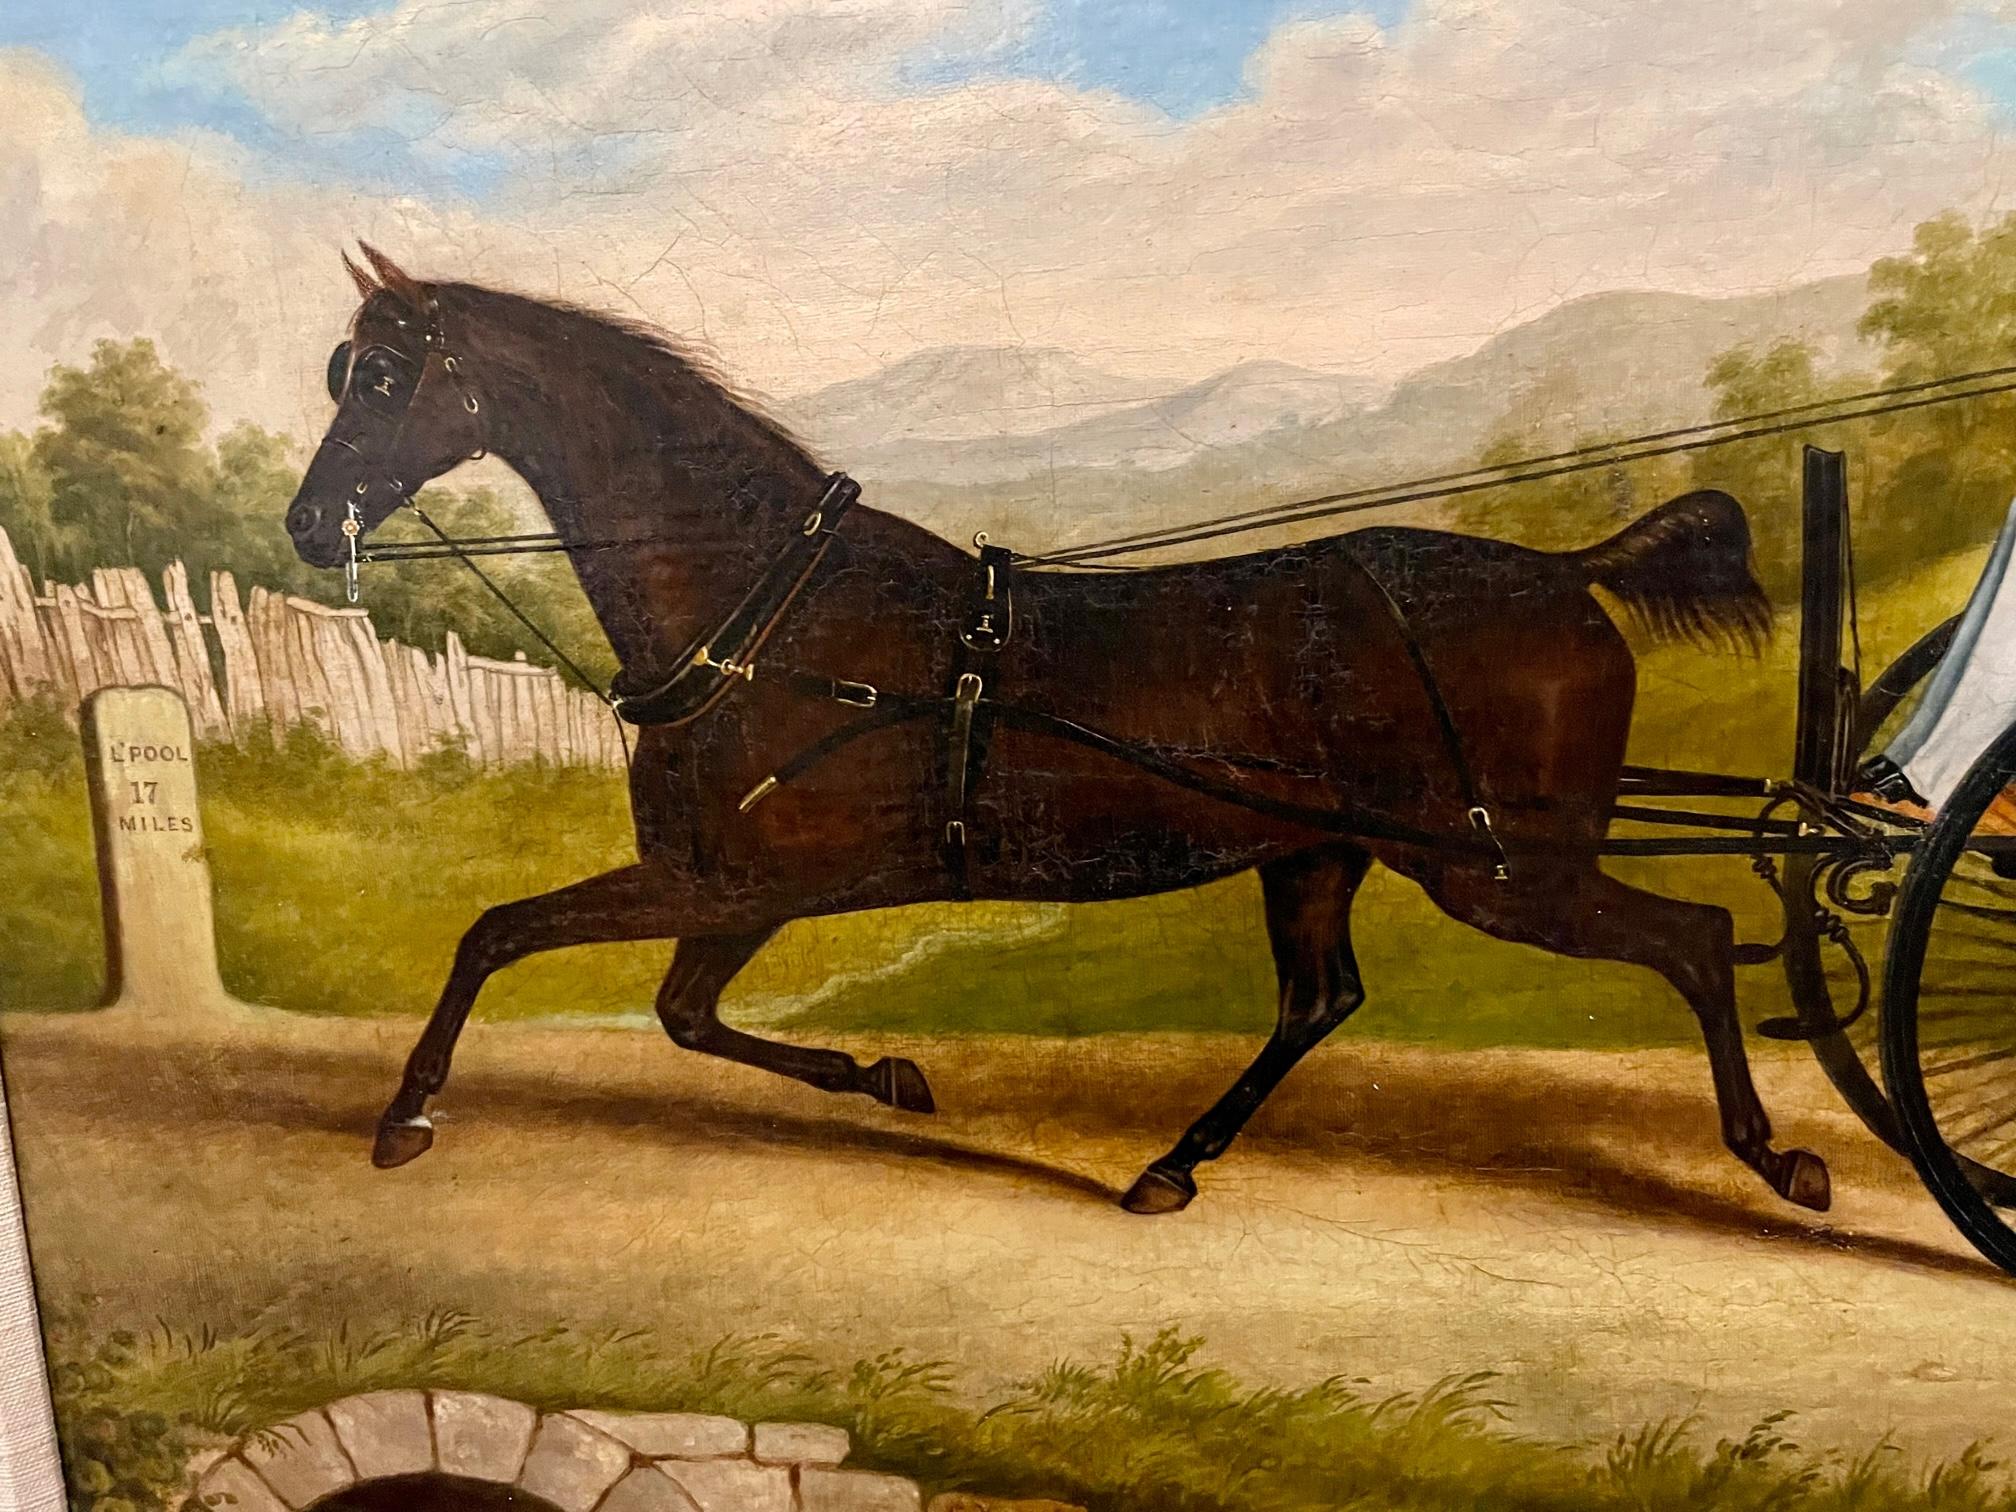 Horse and Sulky reminiscent of Currier and Ives by George Christopher Horner (1821-1881), British artist, imported by Saltire Gallerie.  Signed and dated 1846, the painting is titled Sulky on the Road, 17 miles from Liverpool.  Bridle and harness